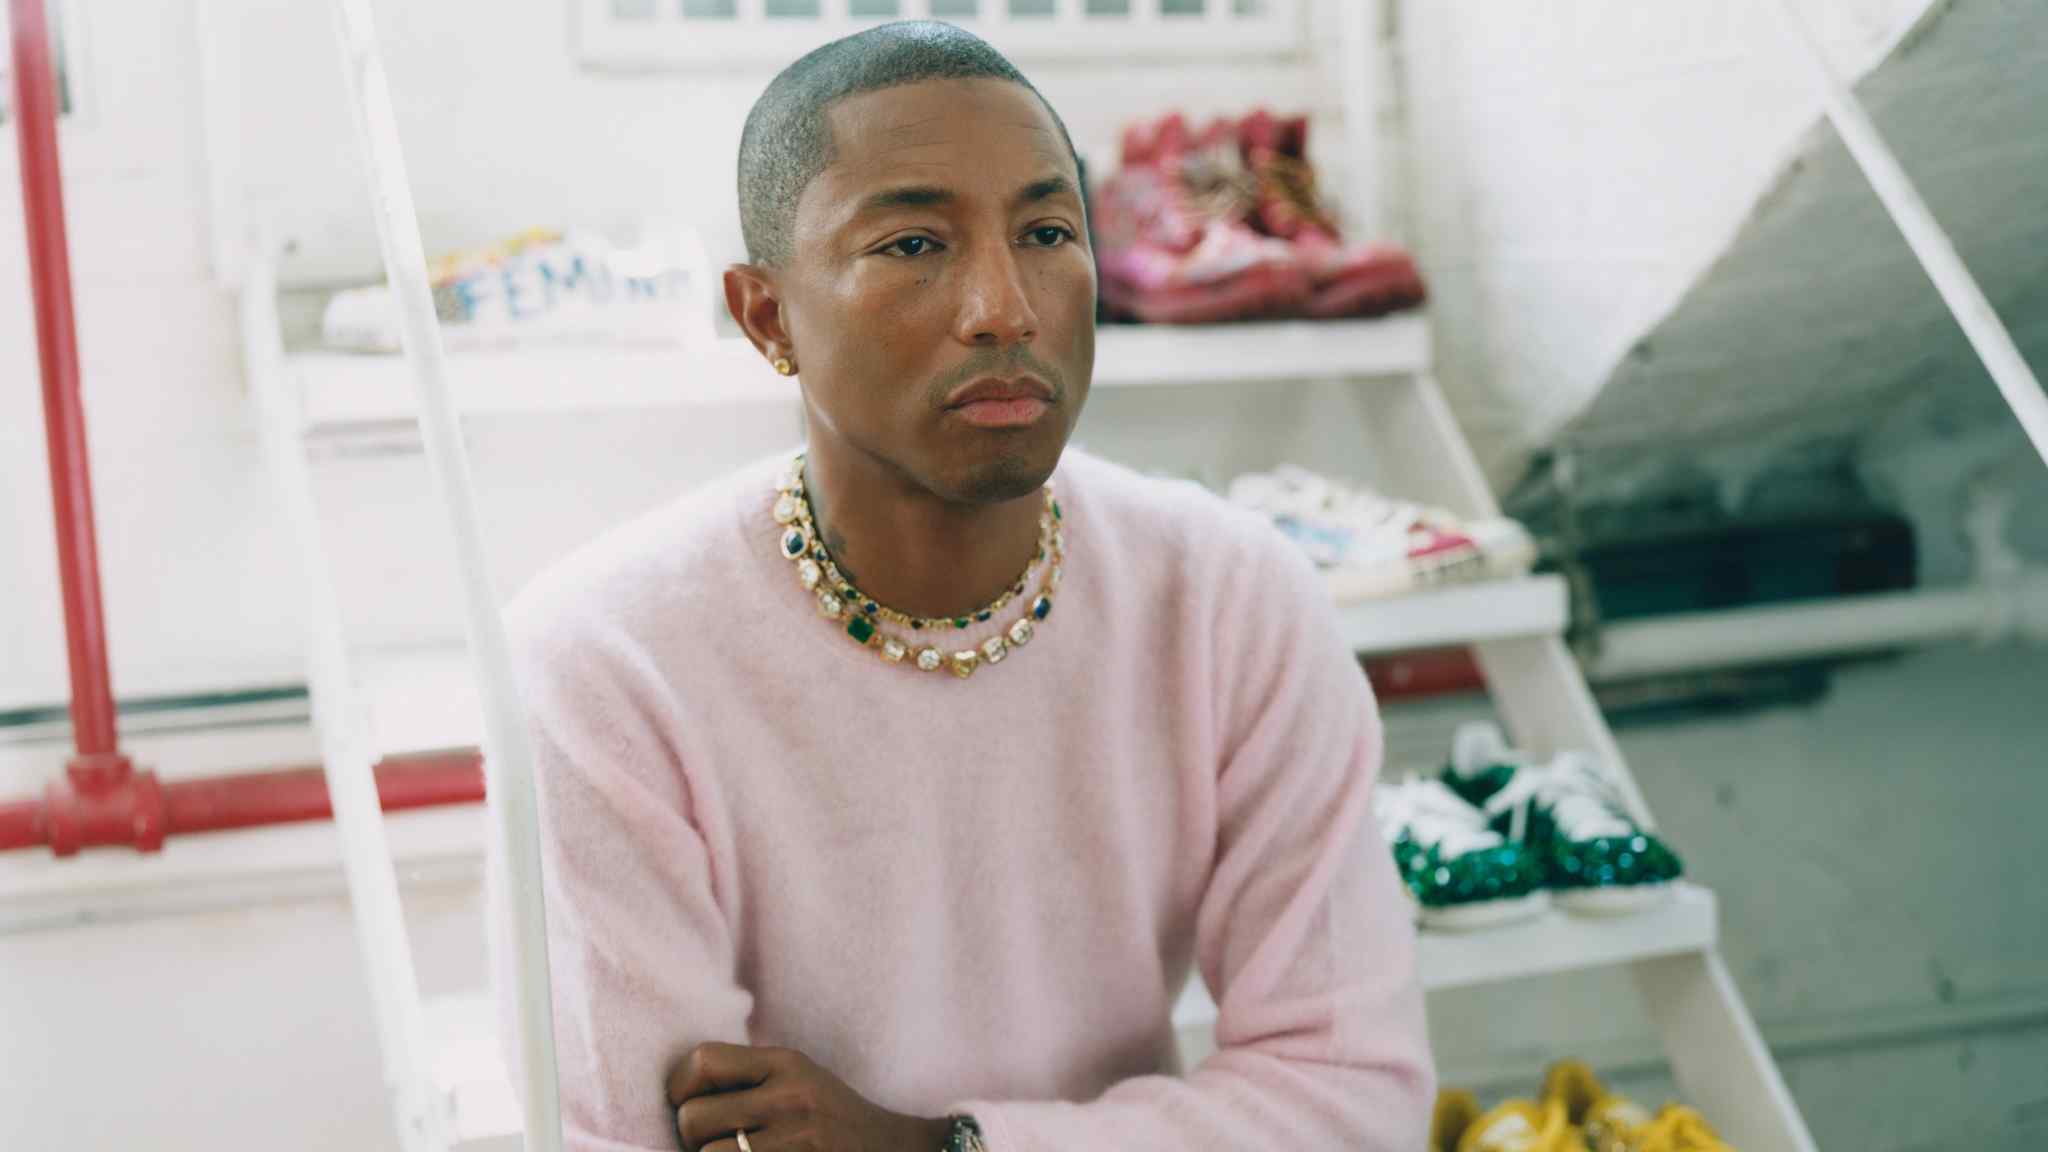 Everything must go – Pharrell Williams is selling off his legacy